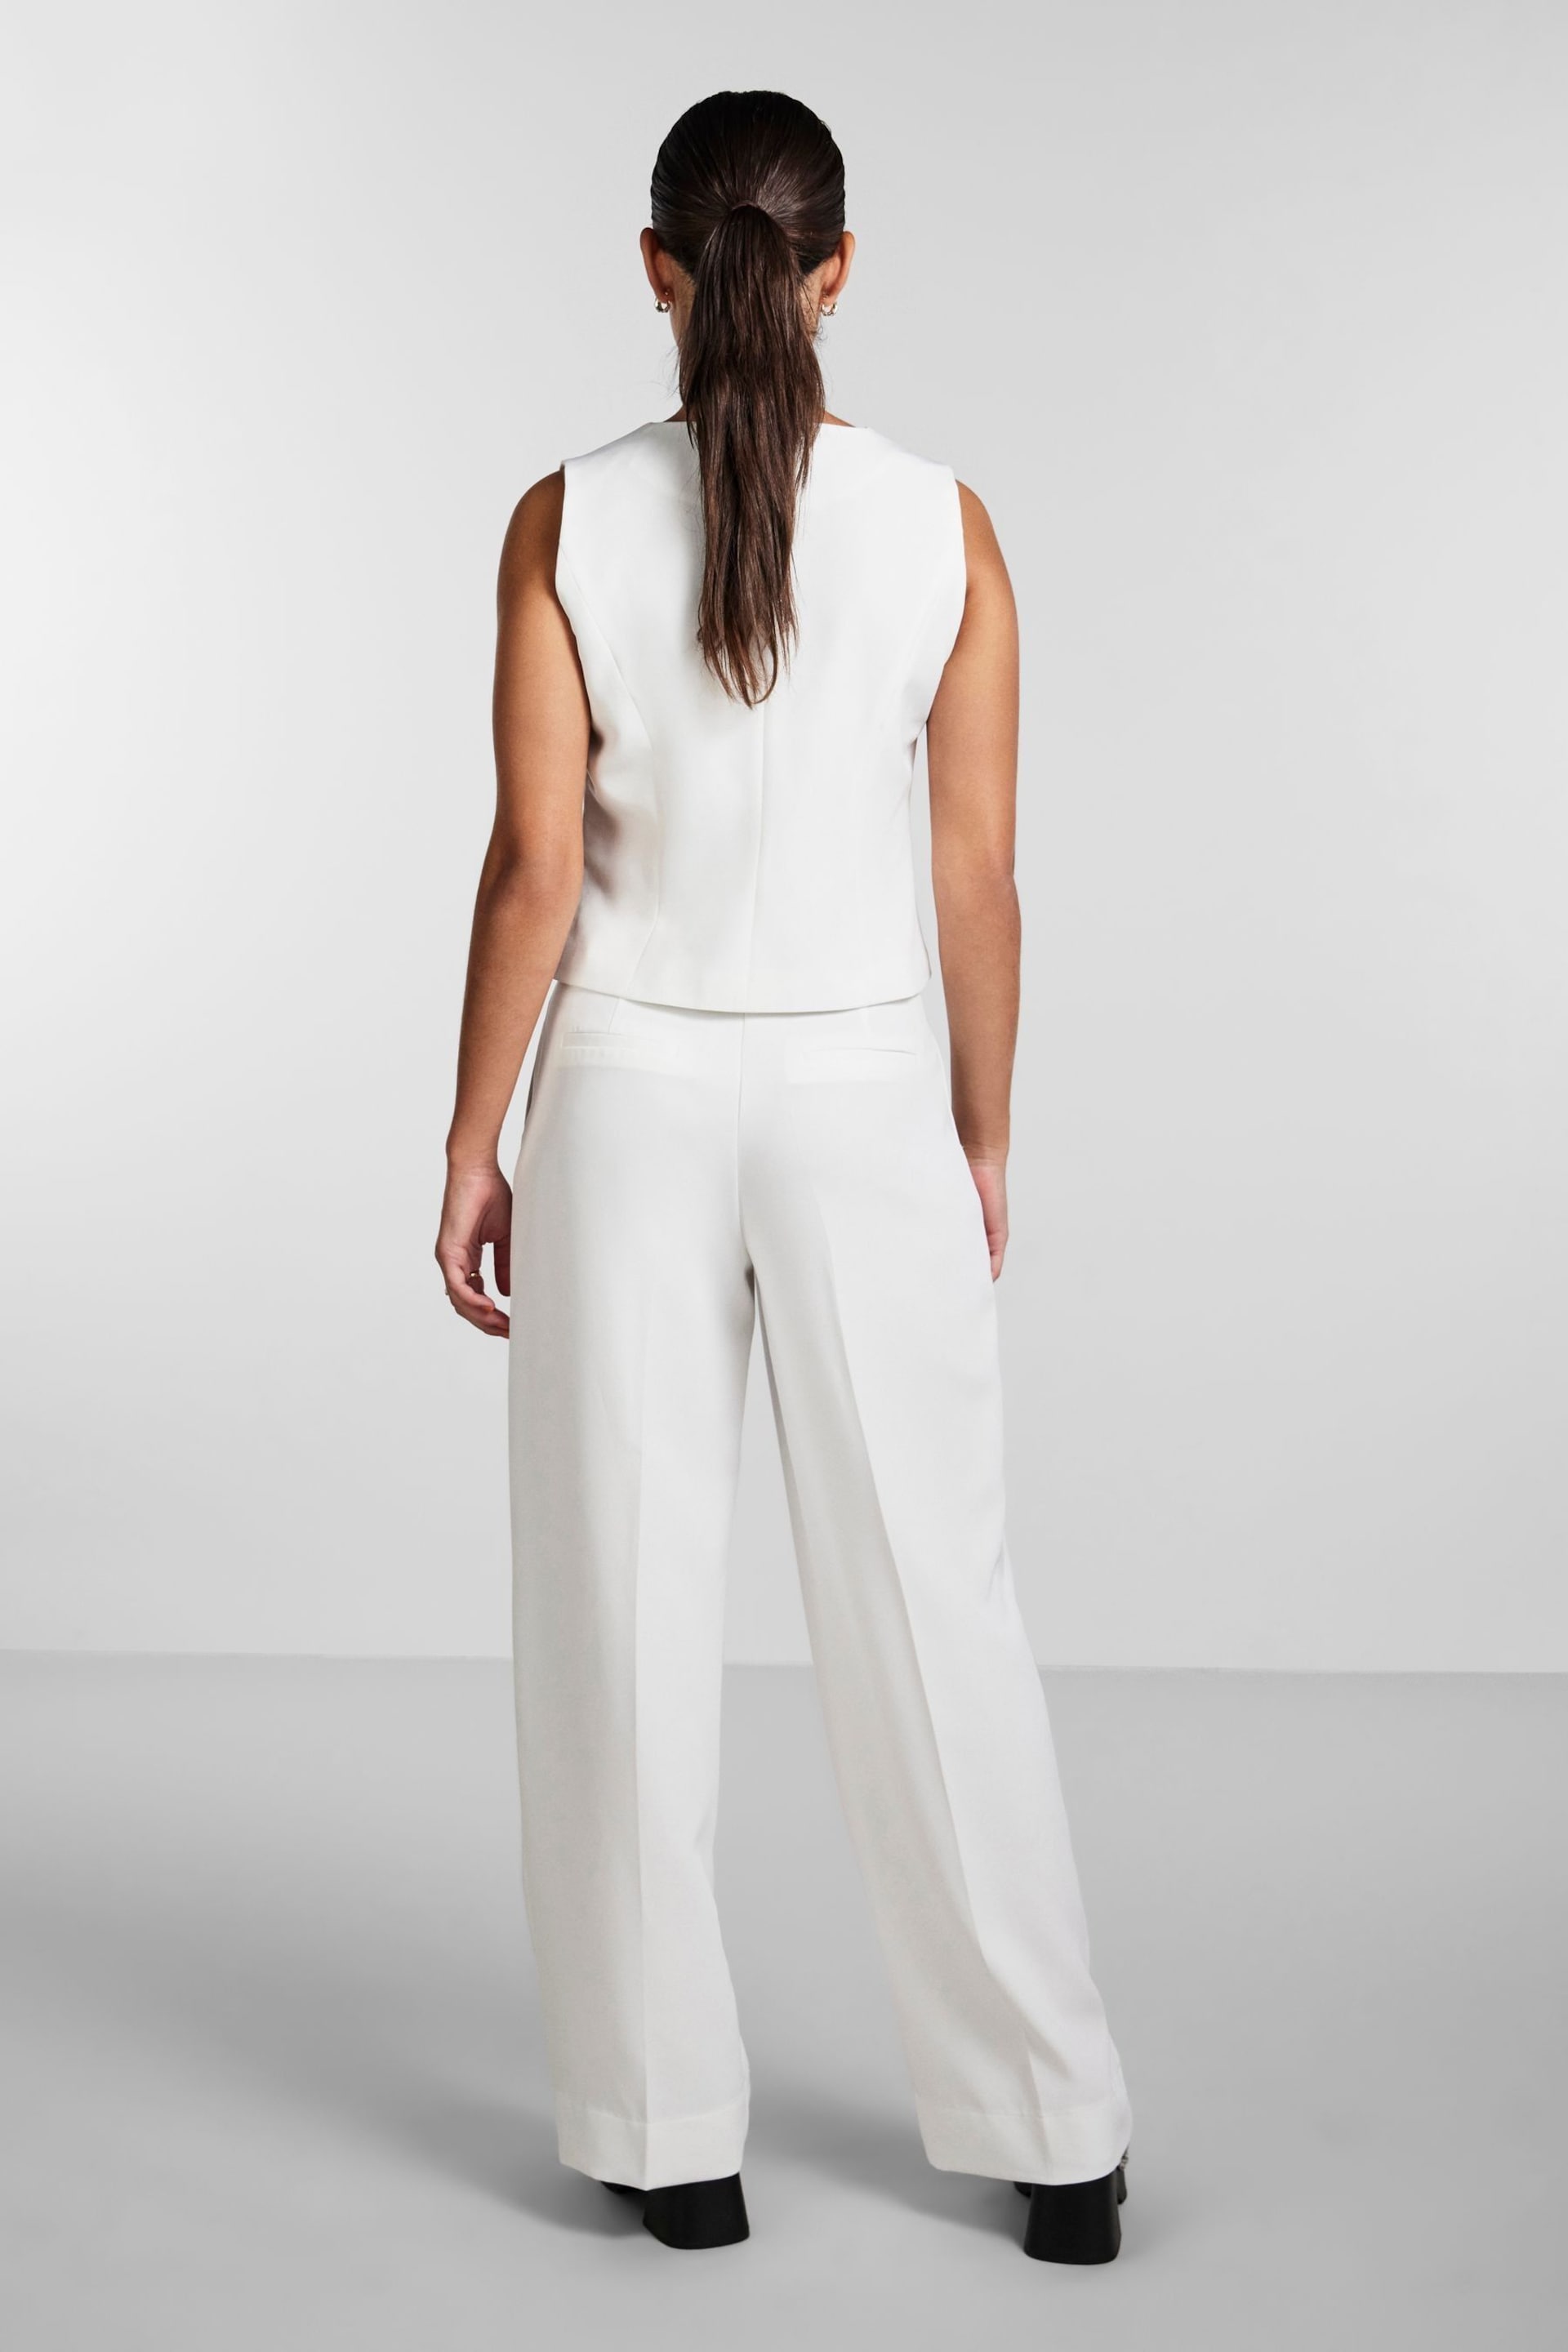 PIECES White High Waisted Wide Leg Trousers - Image 3 of 5